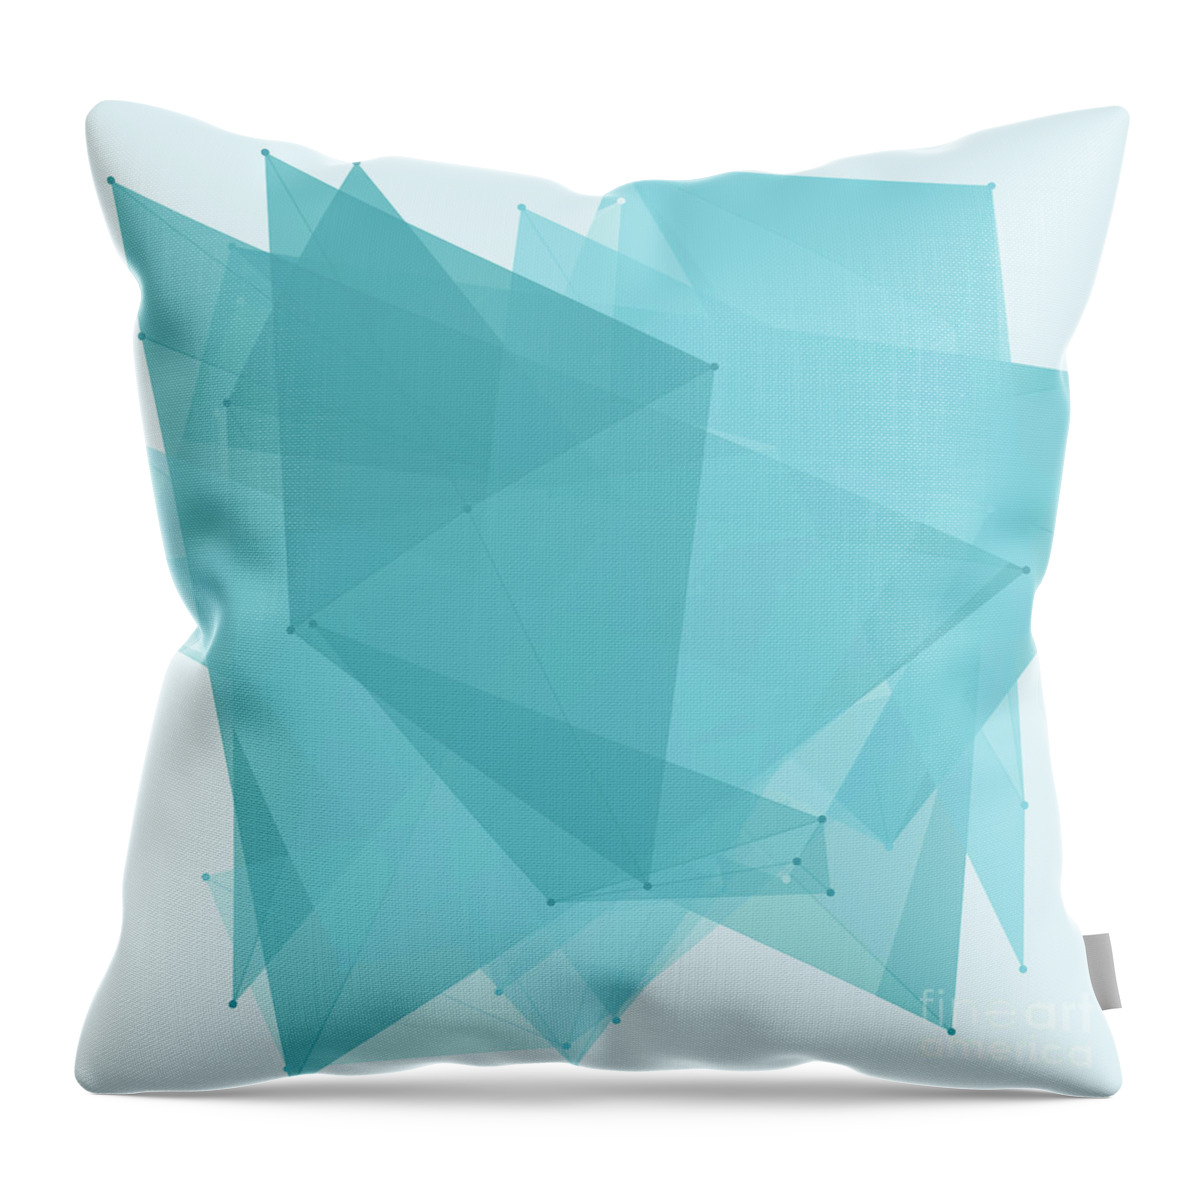 Abstract Throw Pillow featuring the digital art Lake Polygon Pattern by Frank Ramspott